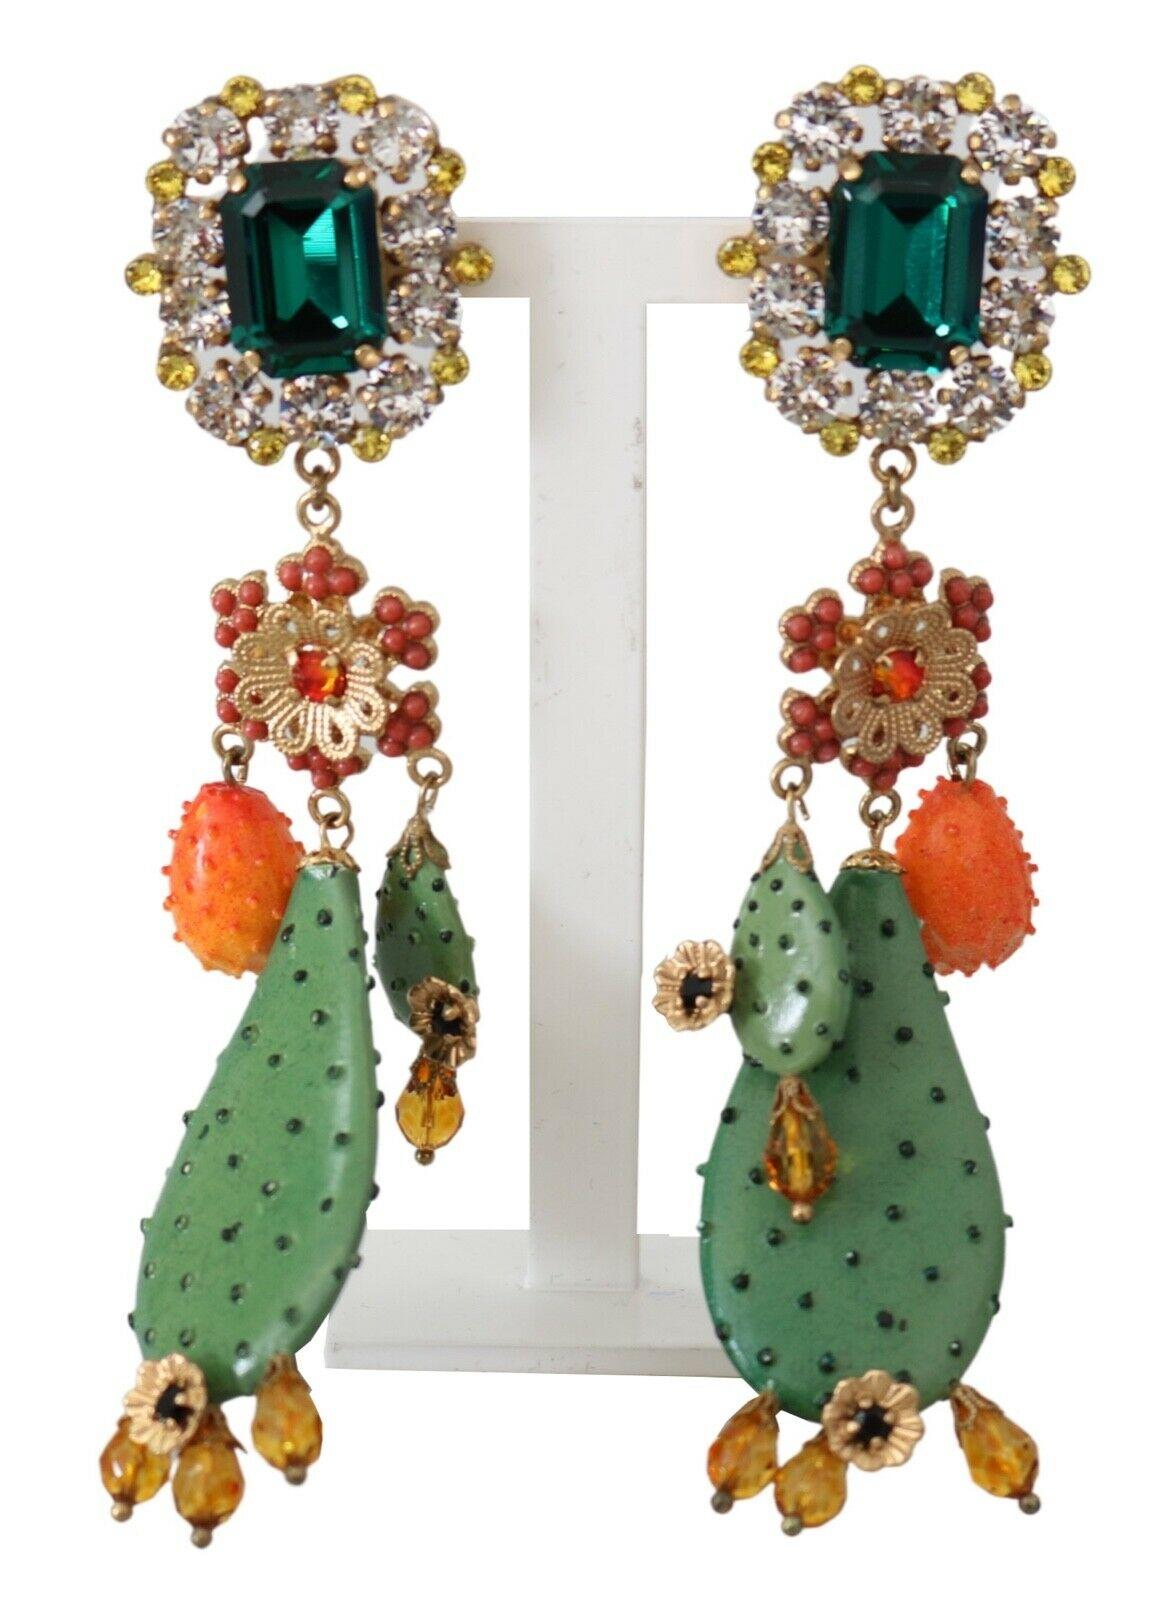  Gorgeous brand new with tags, 100% Authentic Dolce & Gabbana gold tone with cactus filigree multicolor crystals clip on drop earrings.




Model: Clip-on, drop
Motive: Cactus
Material: Brass, crystals

Color: Gold

Crystal: Multicolor

Logo